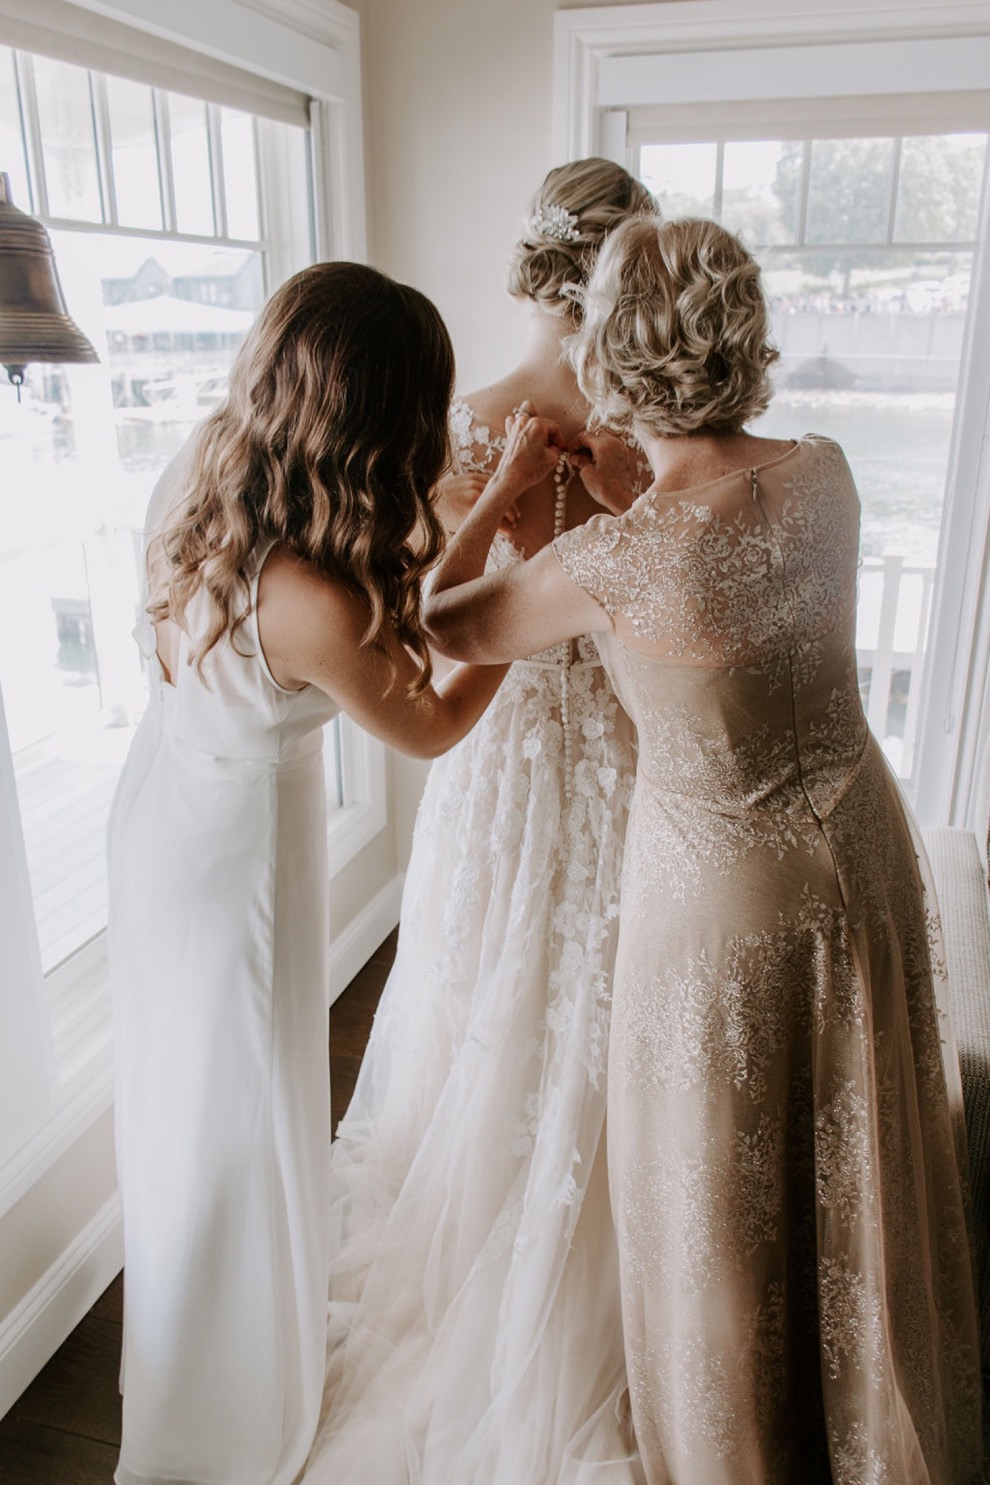 mother and bridesmaid doing up buttons on bride's dress